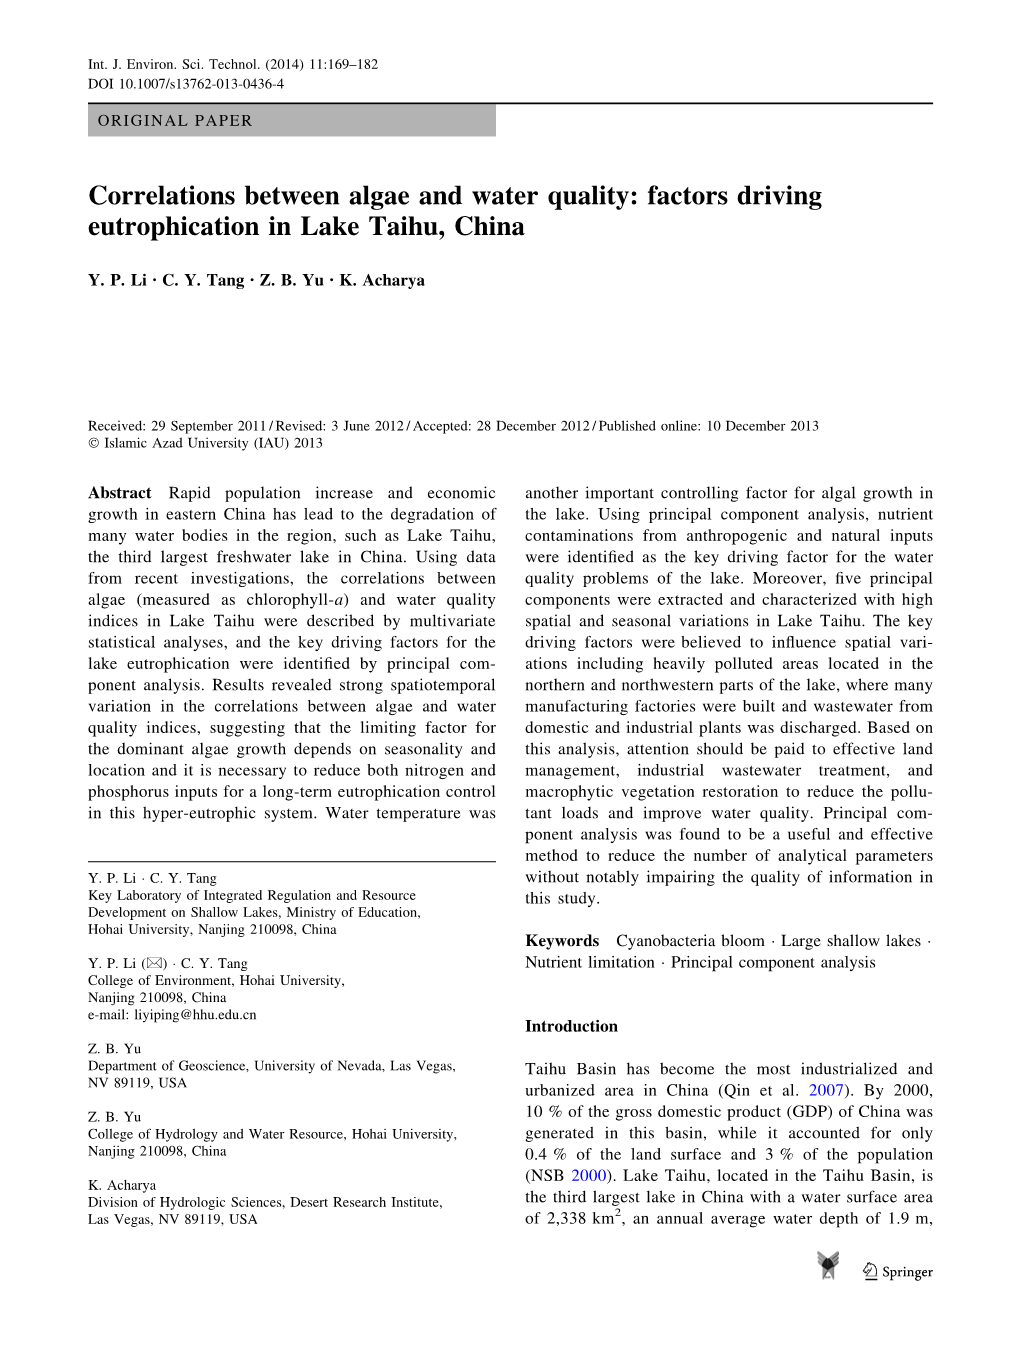 Correlations Between Algae and Water Quality: Factors Driving Eutrophication in Lake Taihu, China